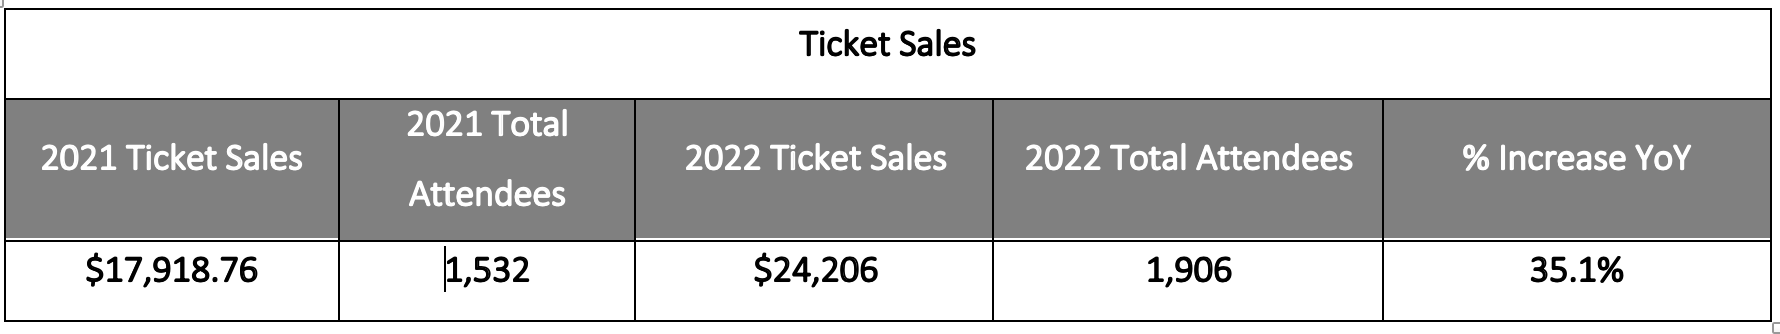 Jacksonville-Boat-Show-Case-Study-Chart-Ticket-Sales